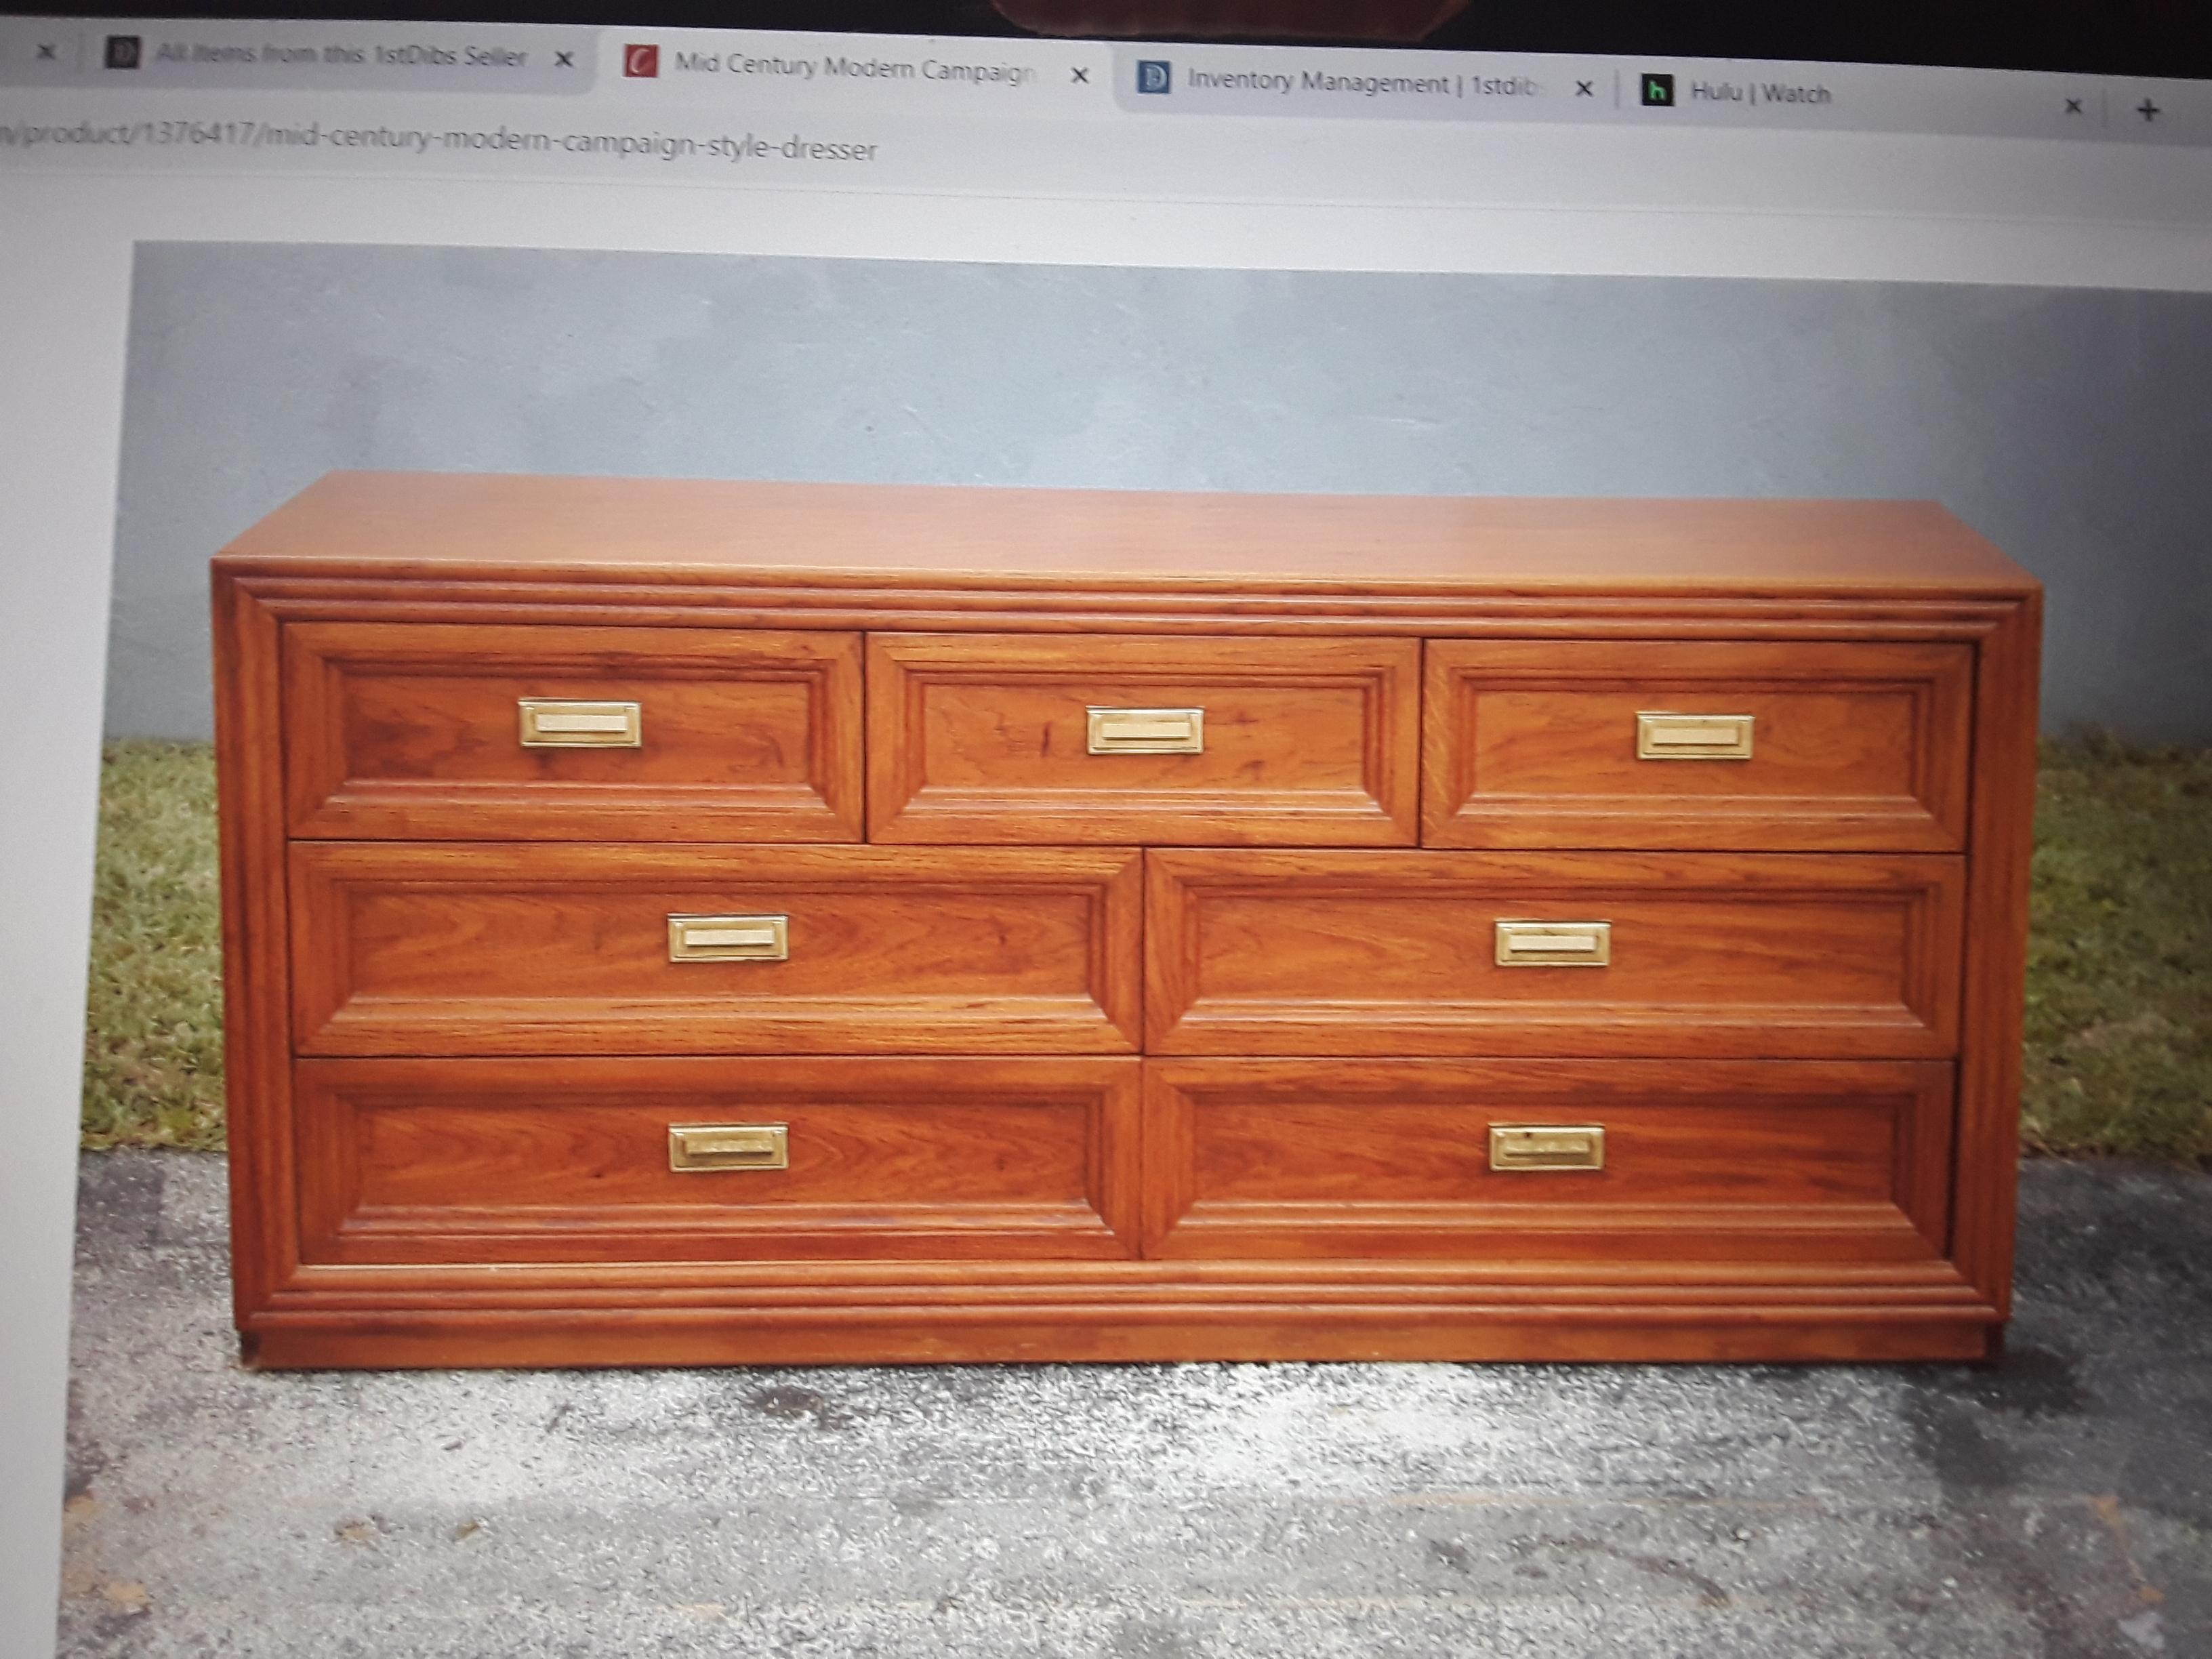 1970's Mid Century Modern 7 Drawer Campaign style Dresser by Thomasville. Beautiful hardware with a warm color tone.